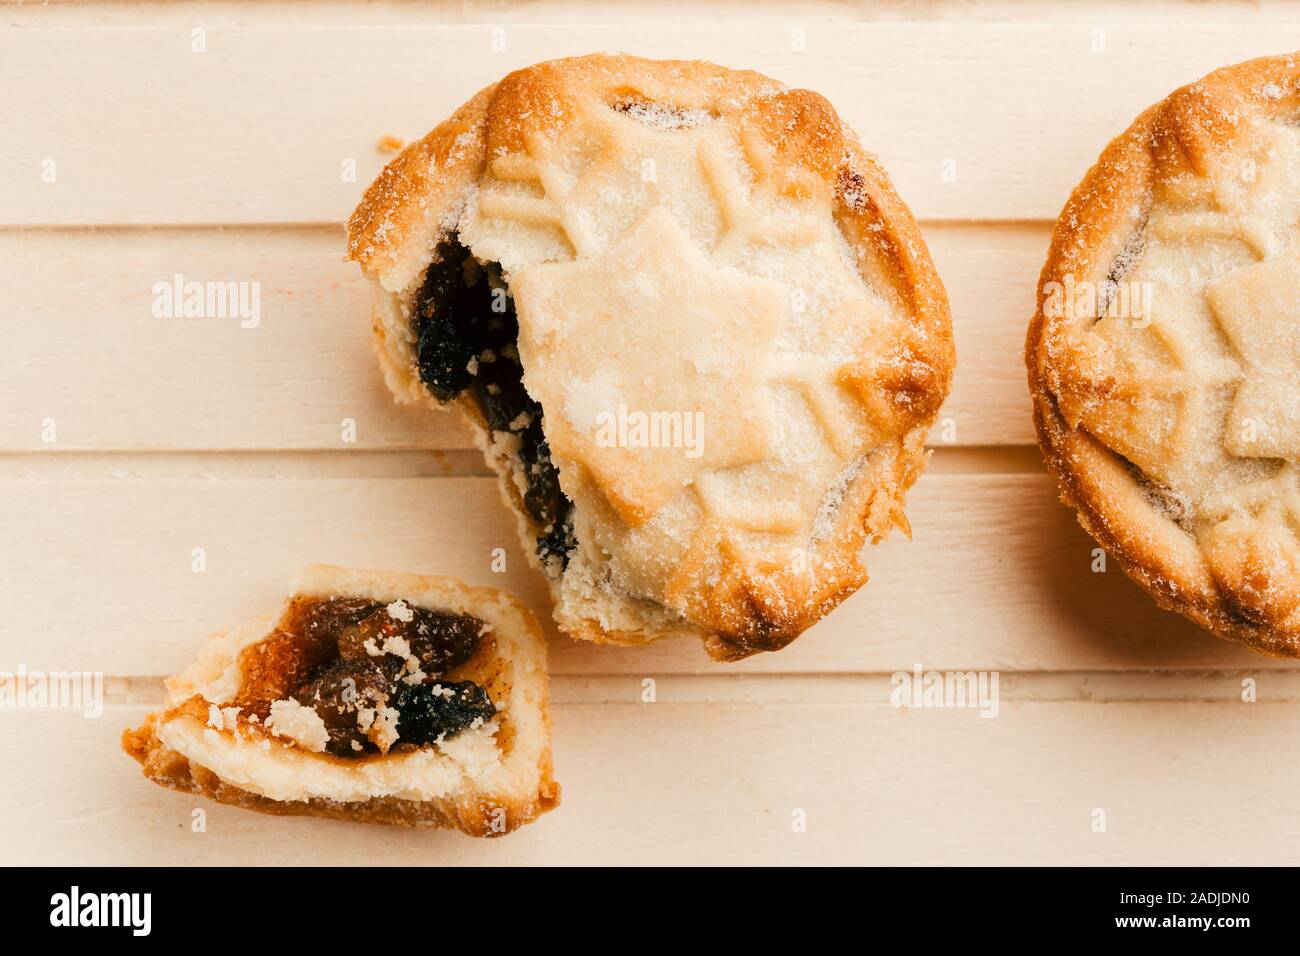 Top view of traditional British Christmas pies on wooden board Stock Photo